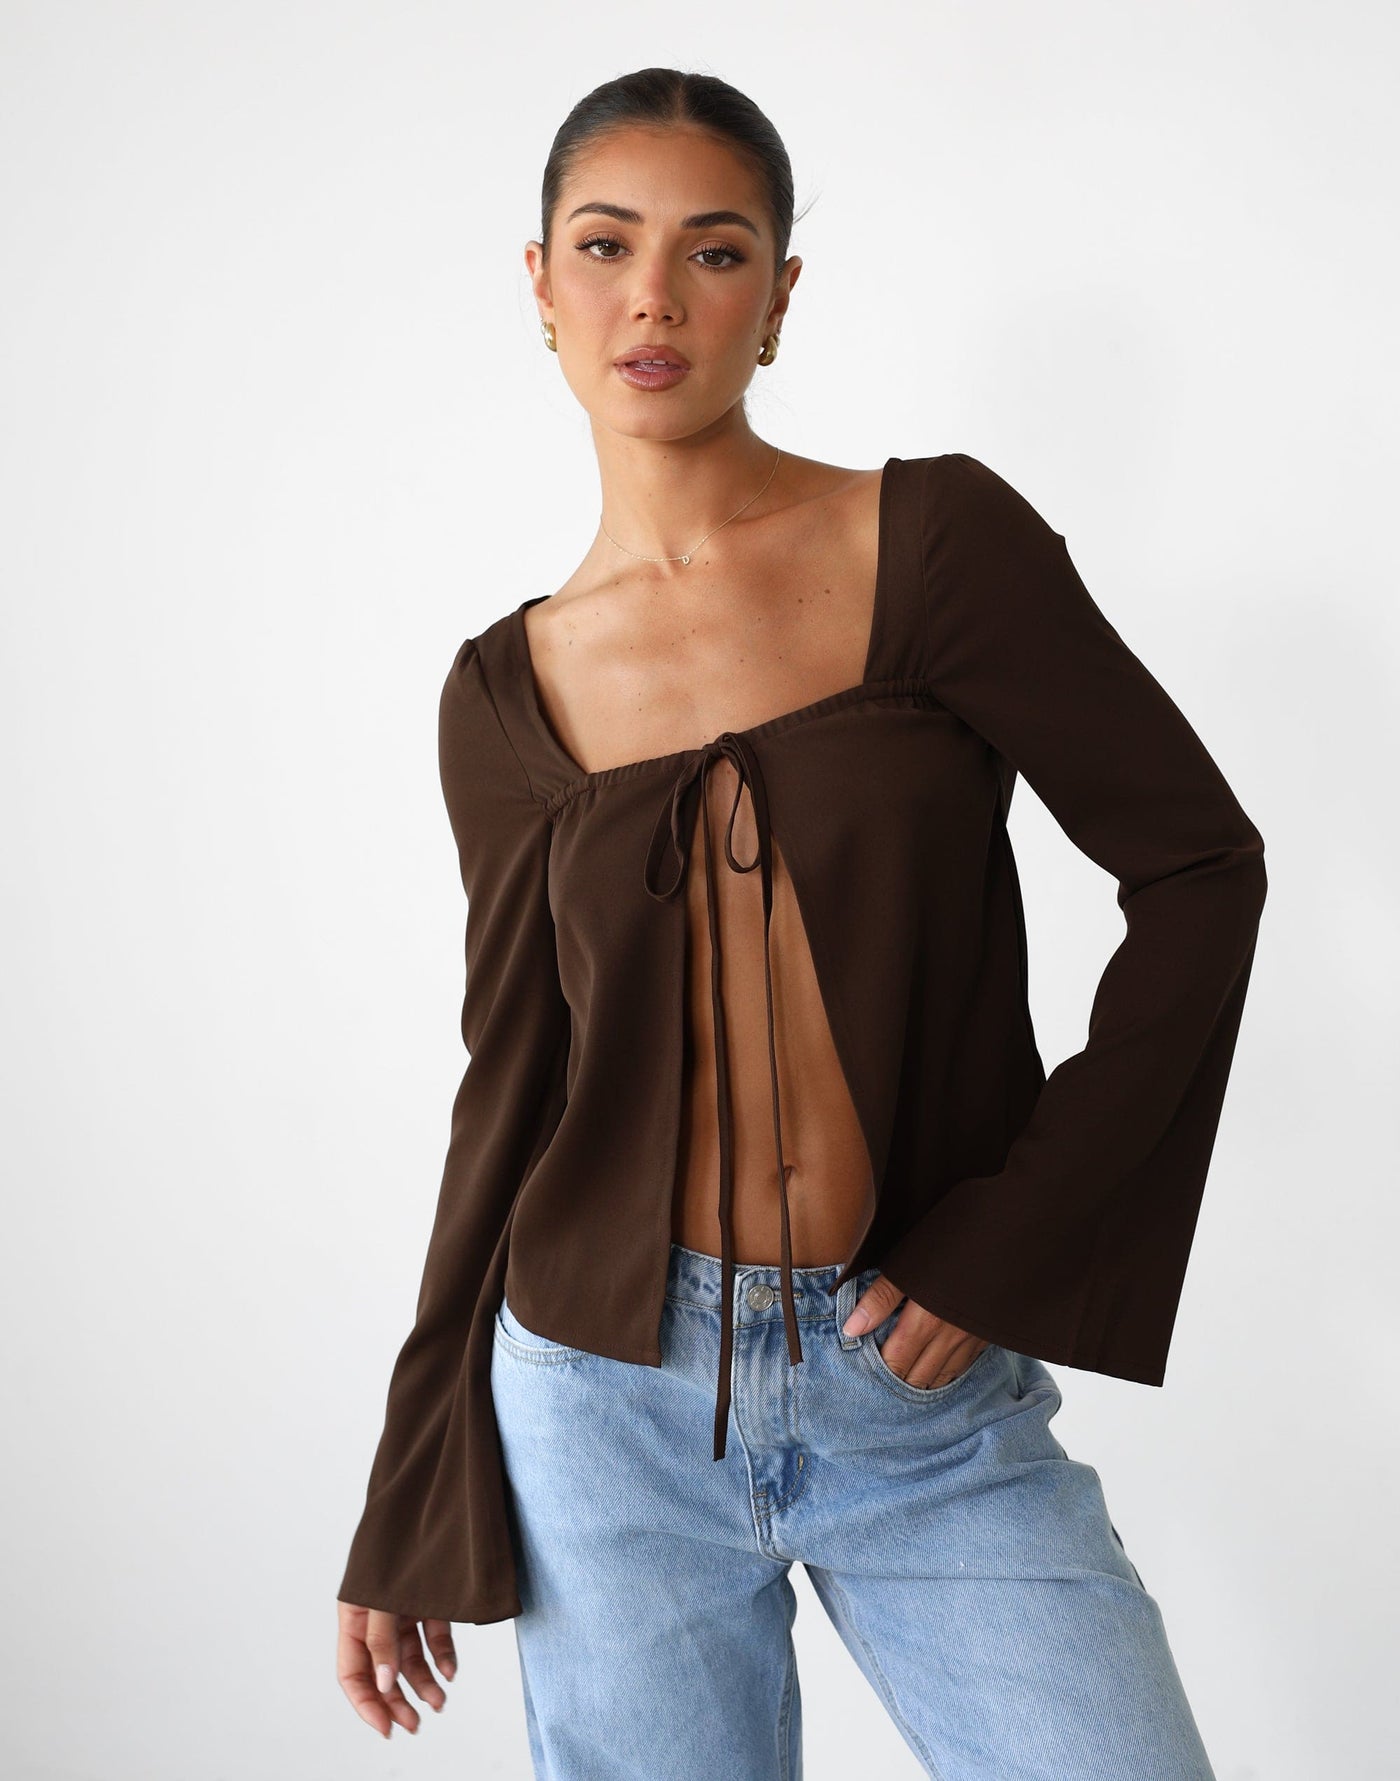 Aria Long Sleeve Top (Cocoa) - Tie Up Open Front Top - Women's Top - Charcoal Clothing